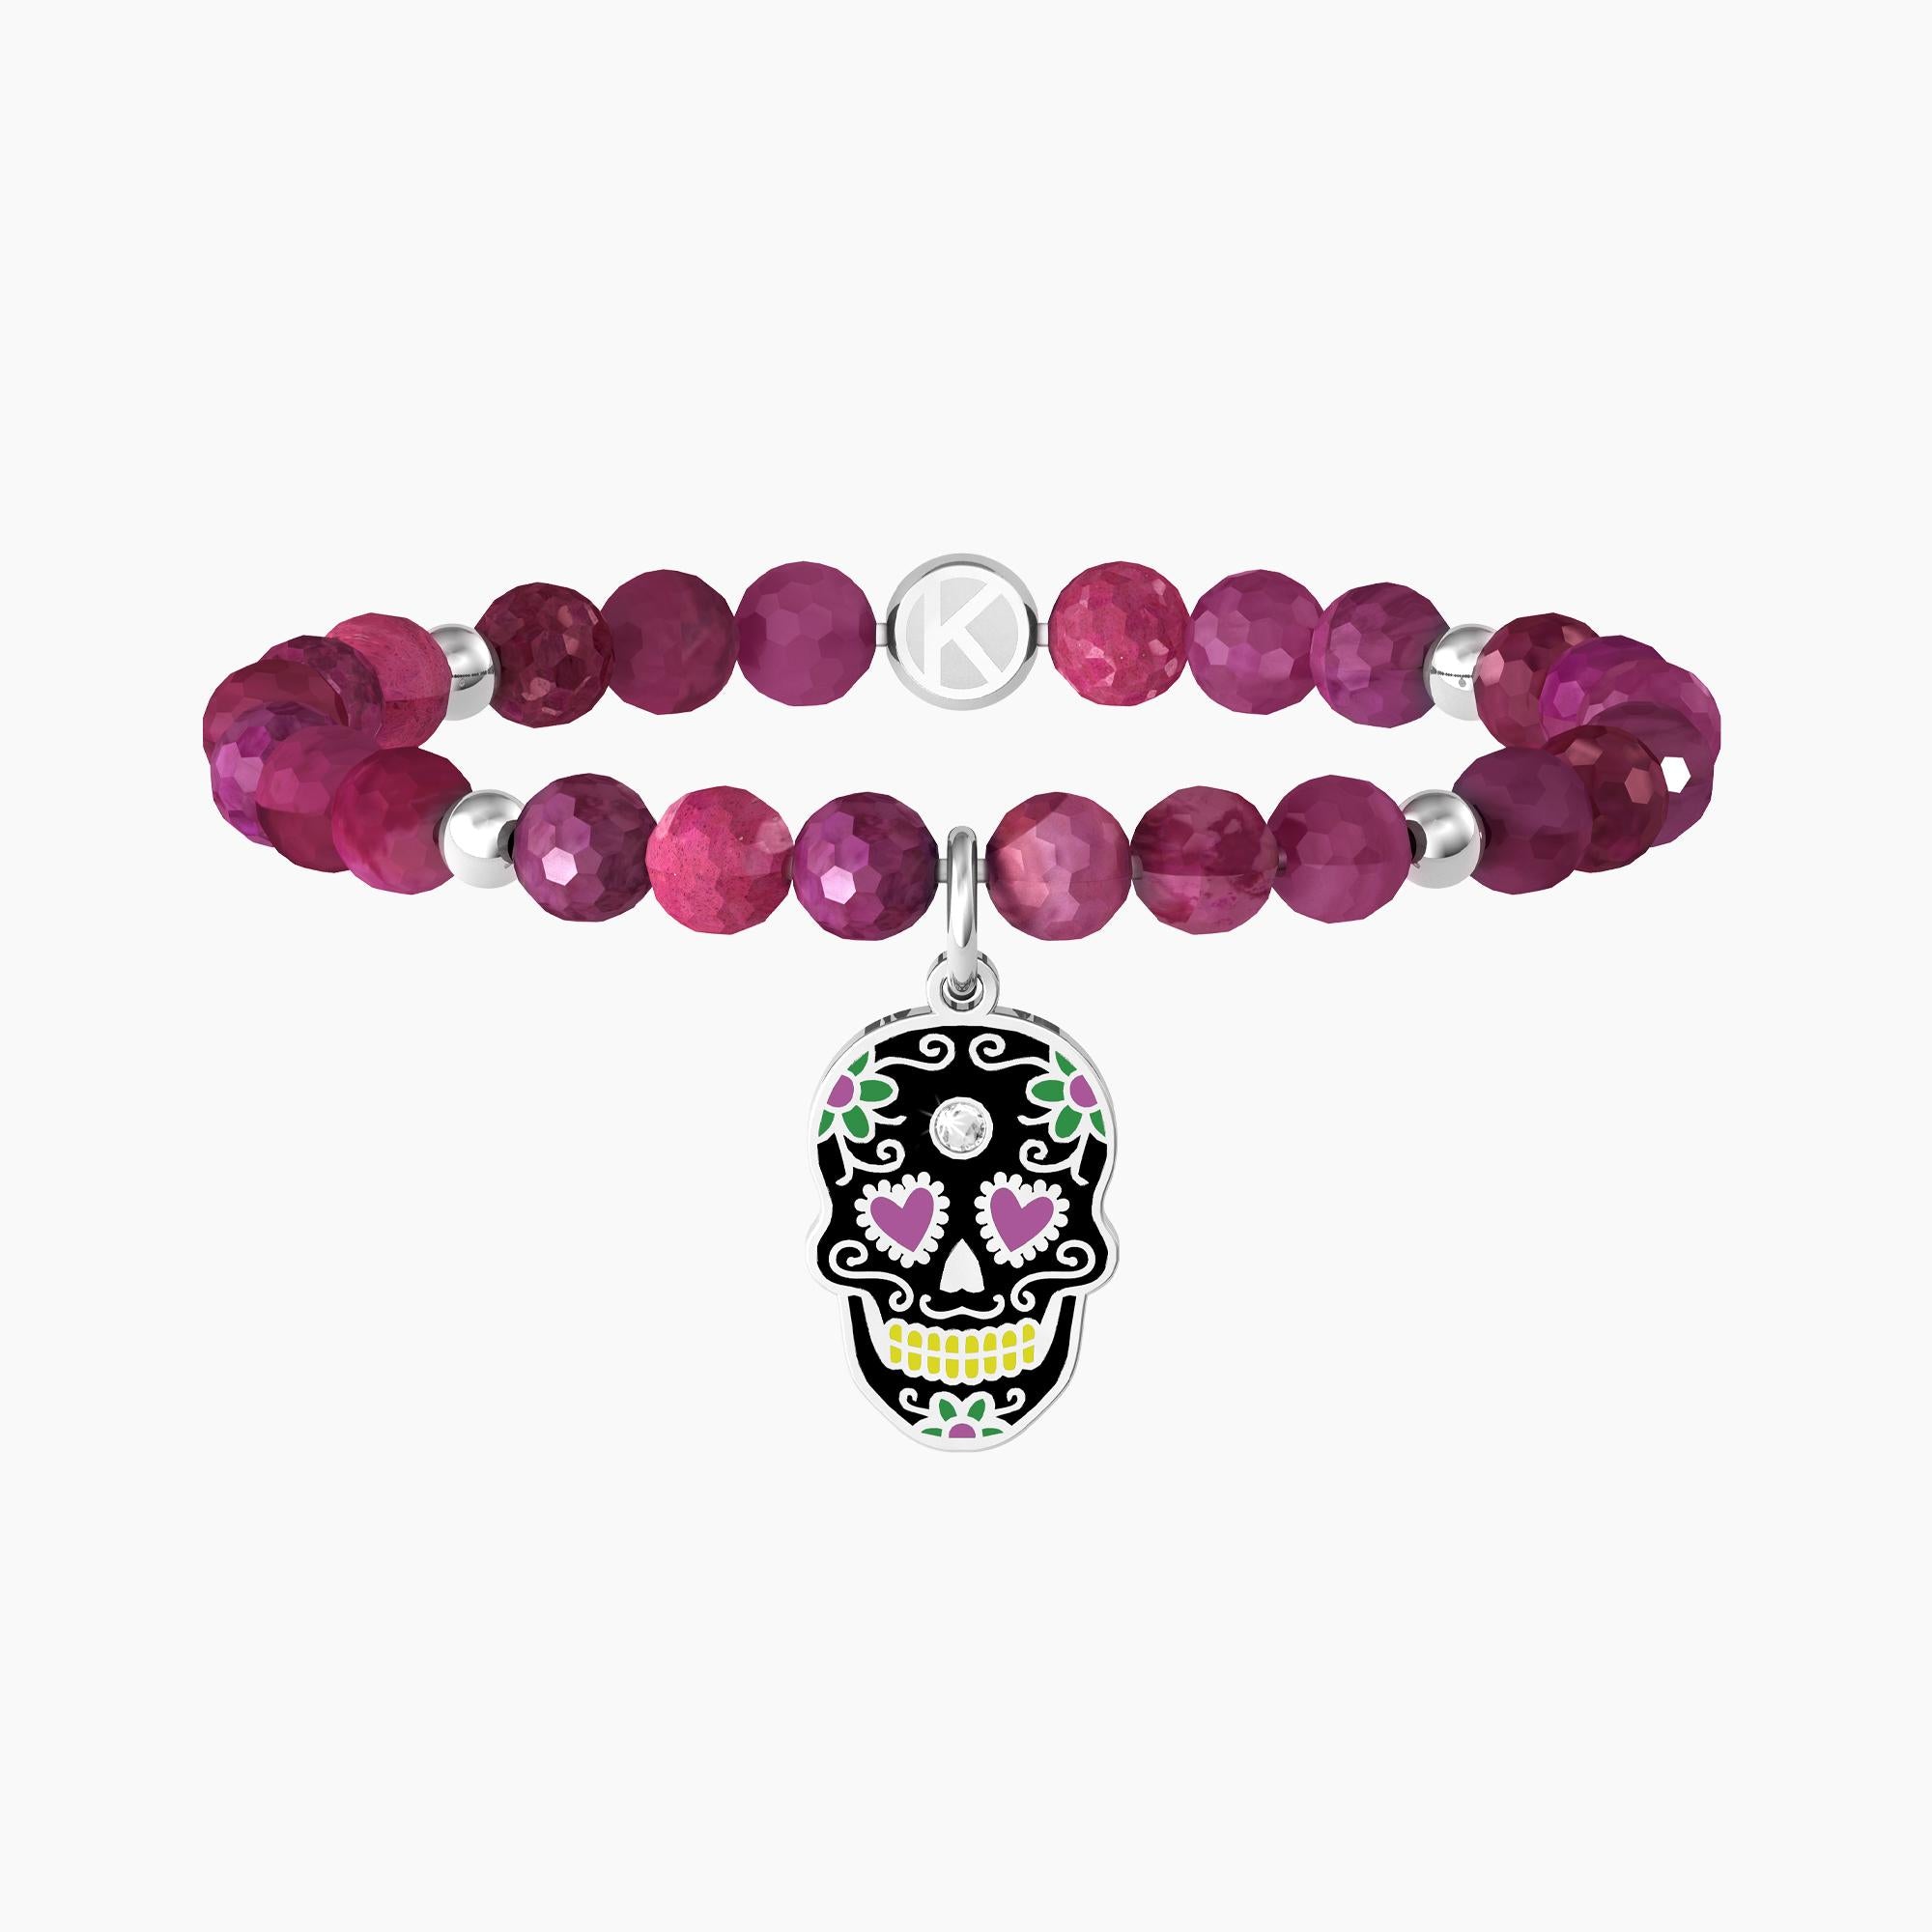 Fuchsia agate bracelet with skull
 MEXICAN SKULL | WITHOUT FEAR - 732105